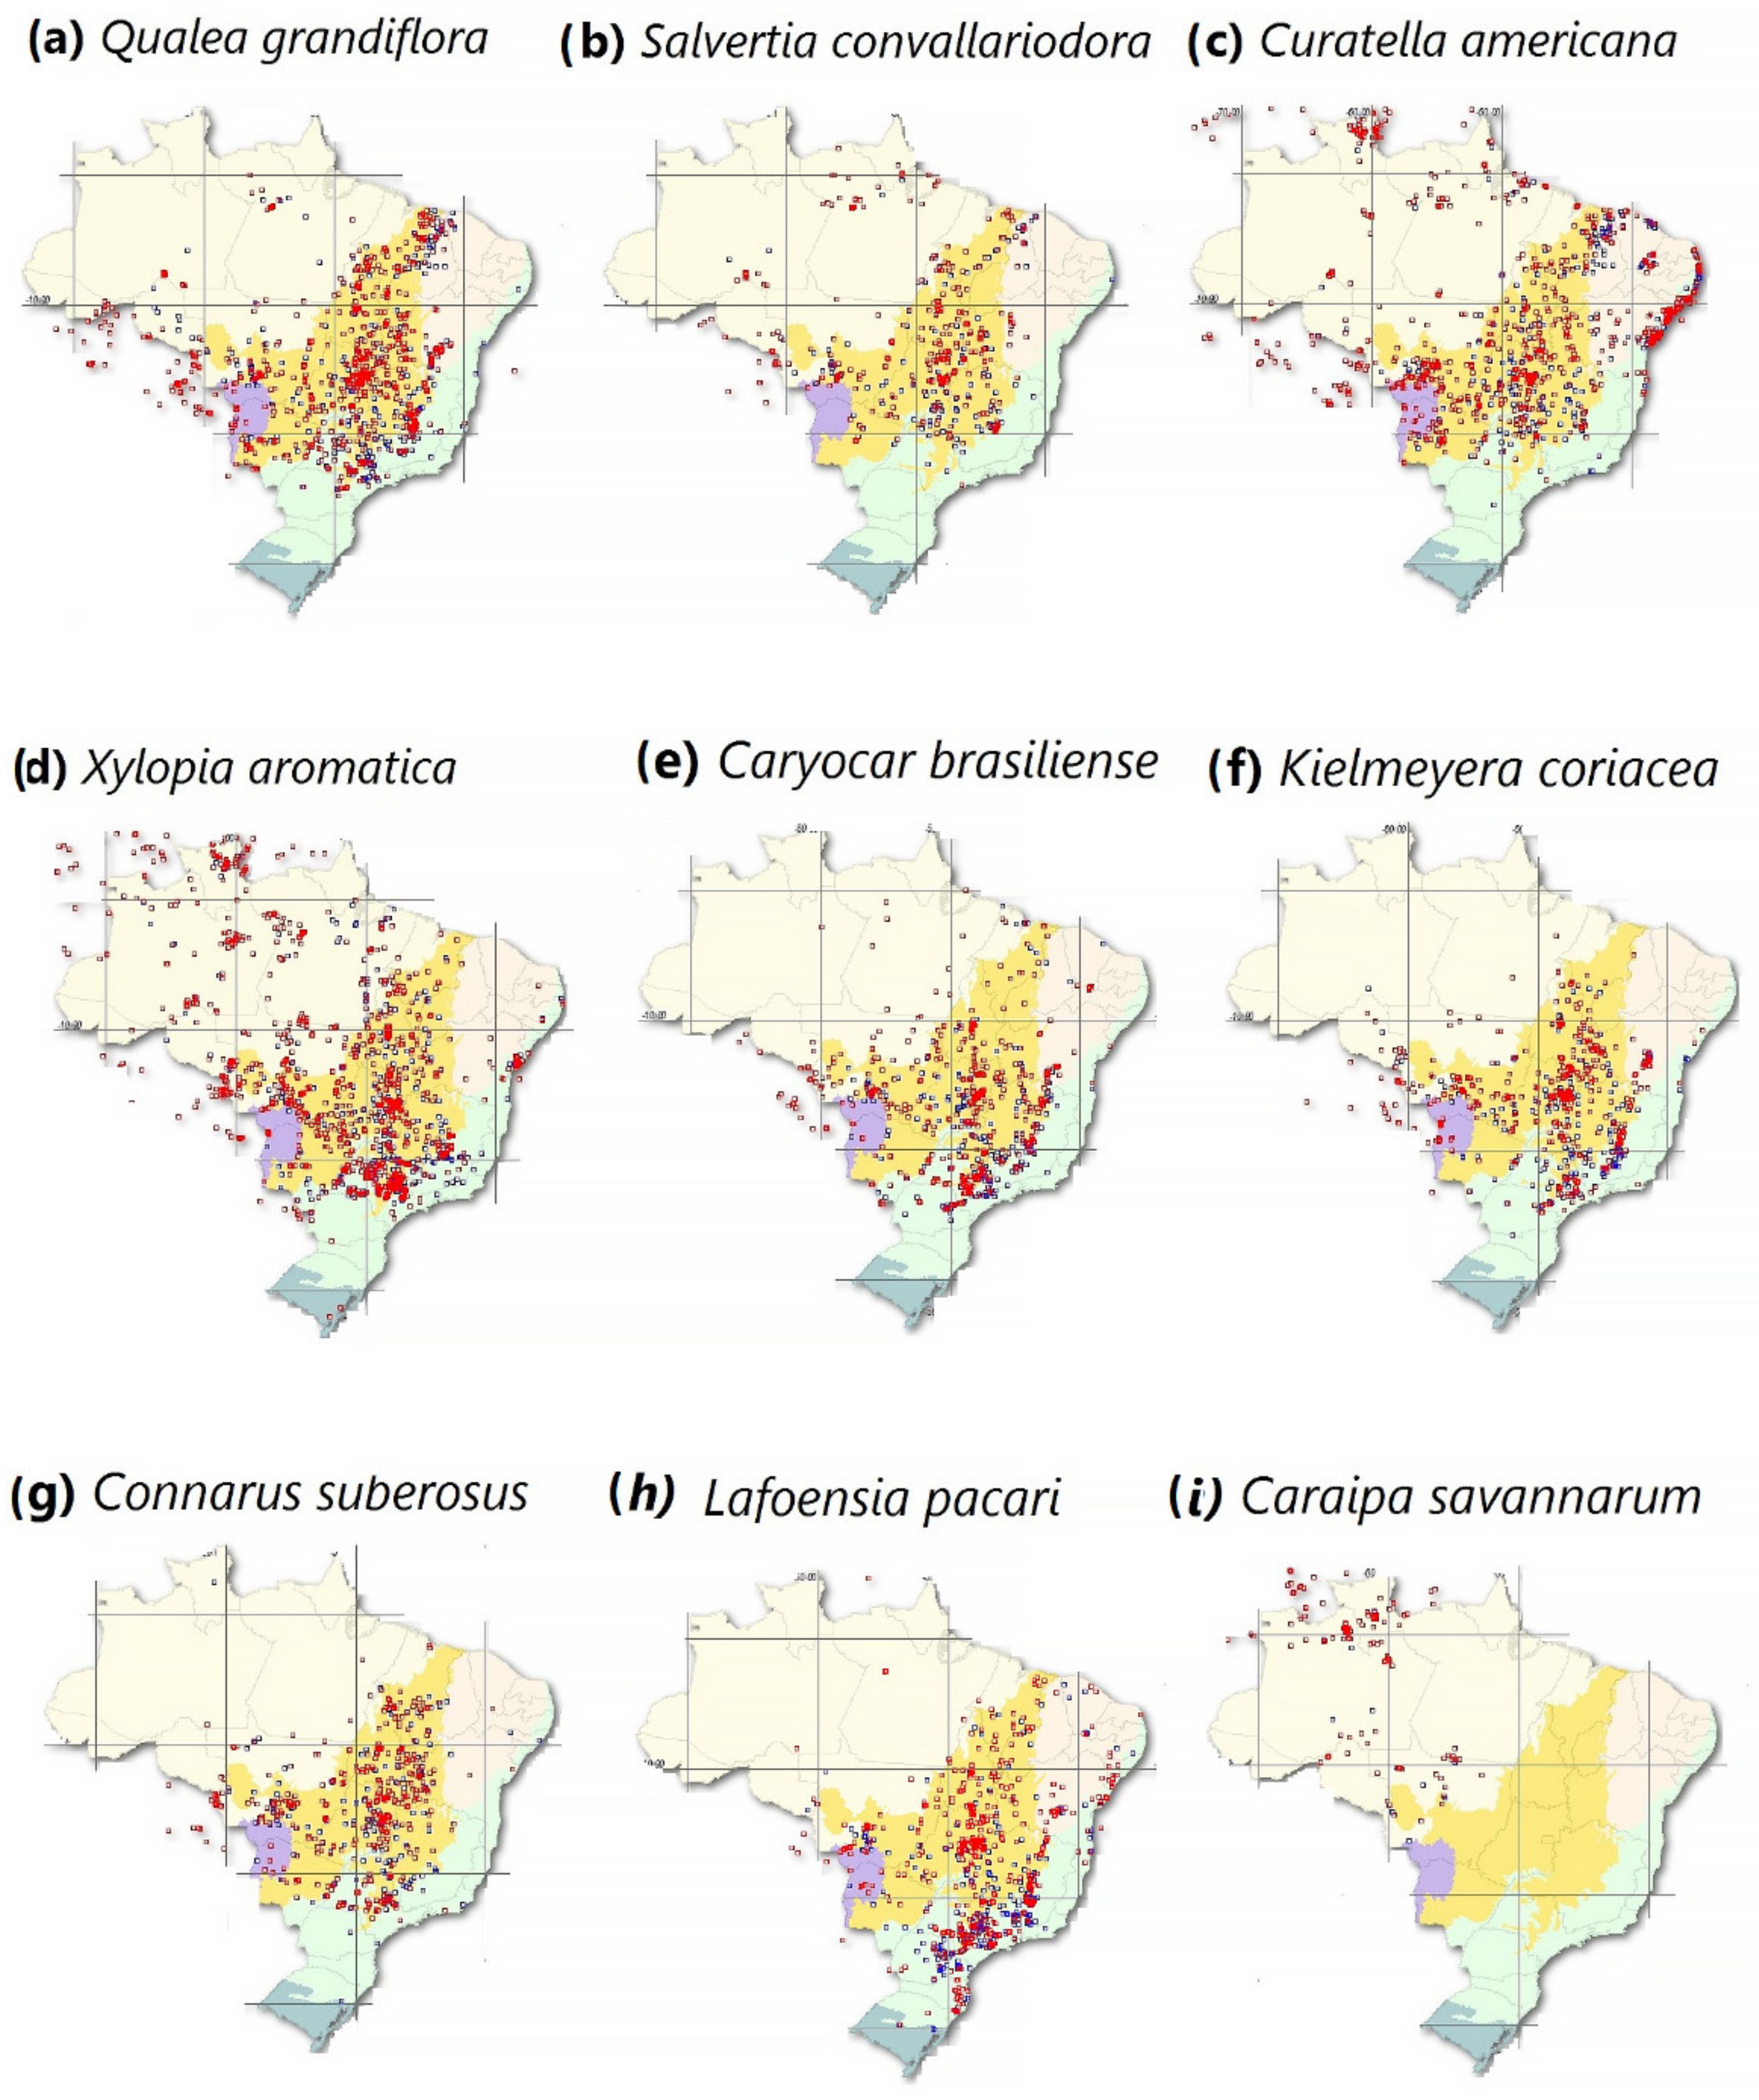 Forests | Free Full-Text | The Effects of Environmental Changes on Plant  Species and Forest Dependent Communities in the Amazon Region